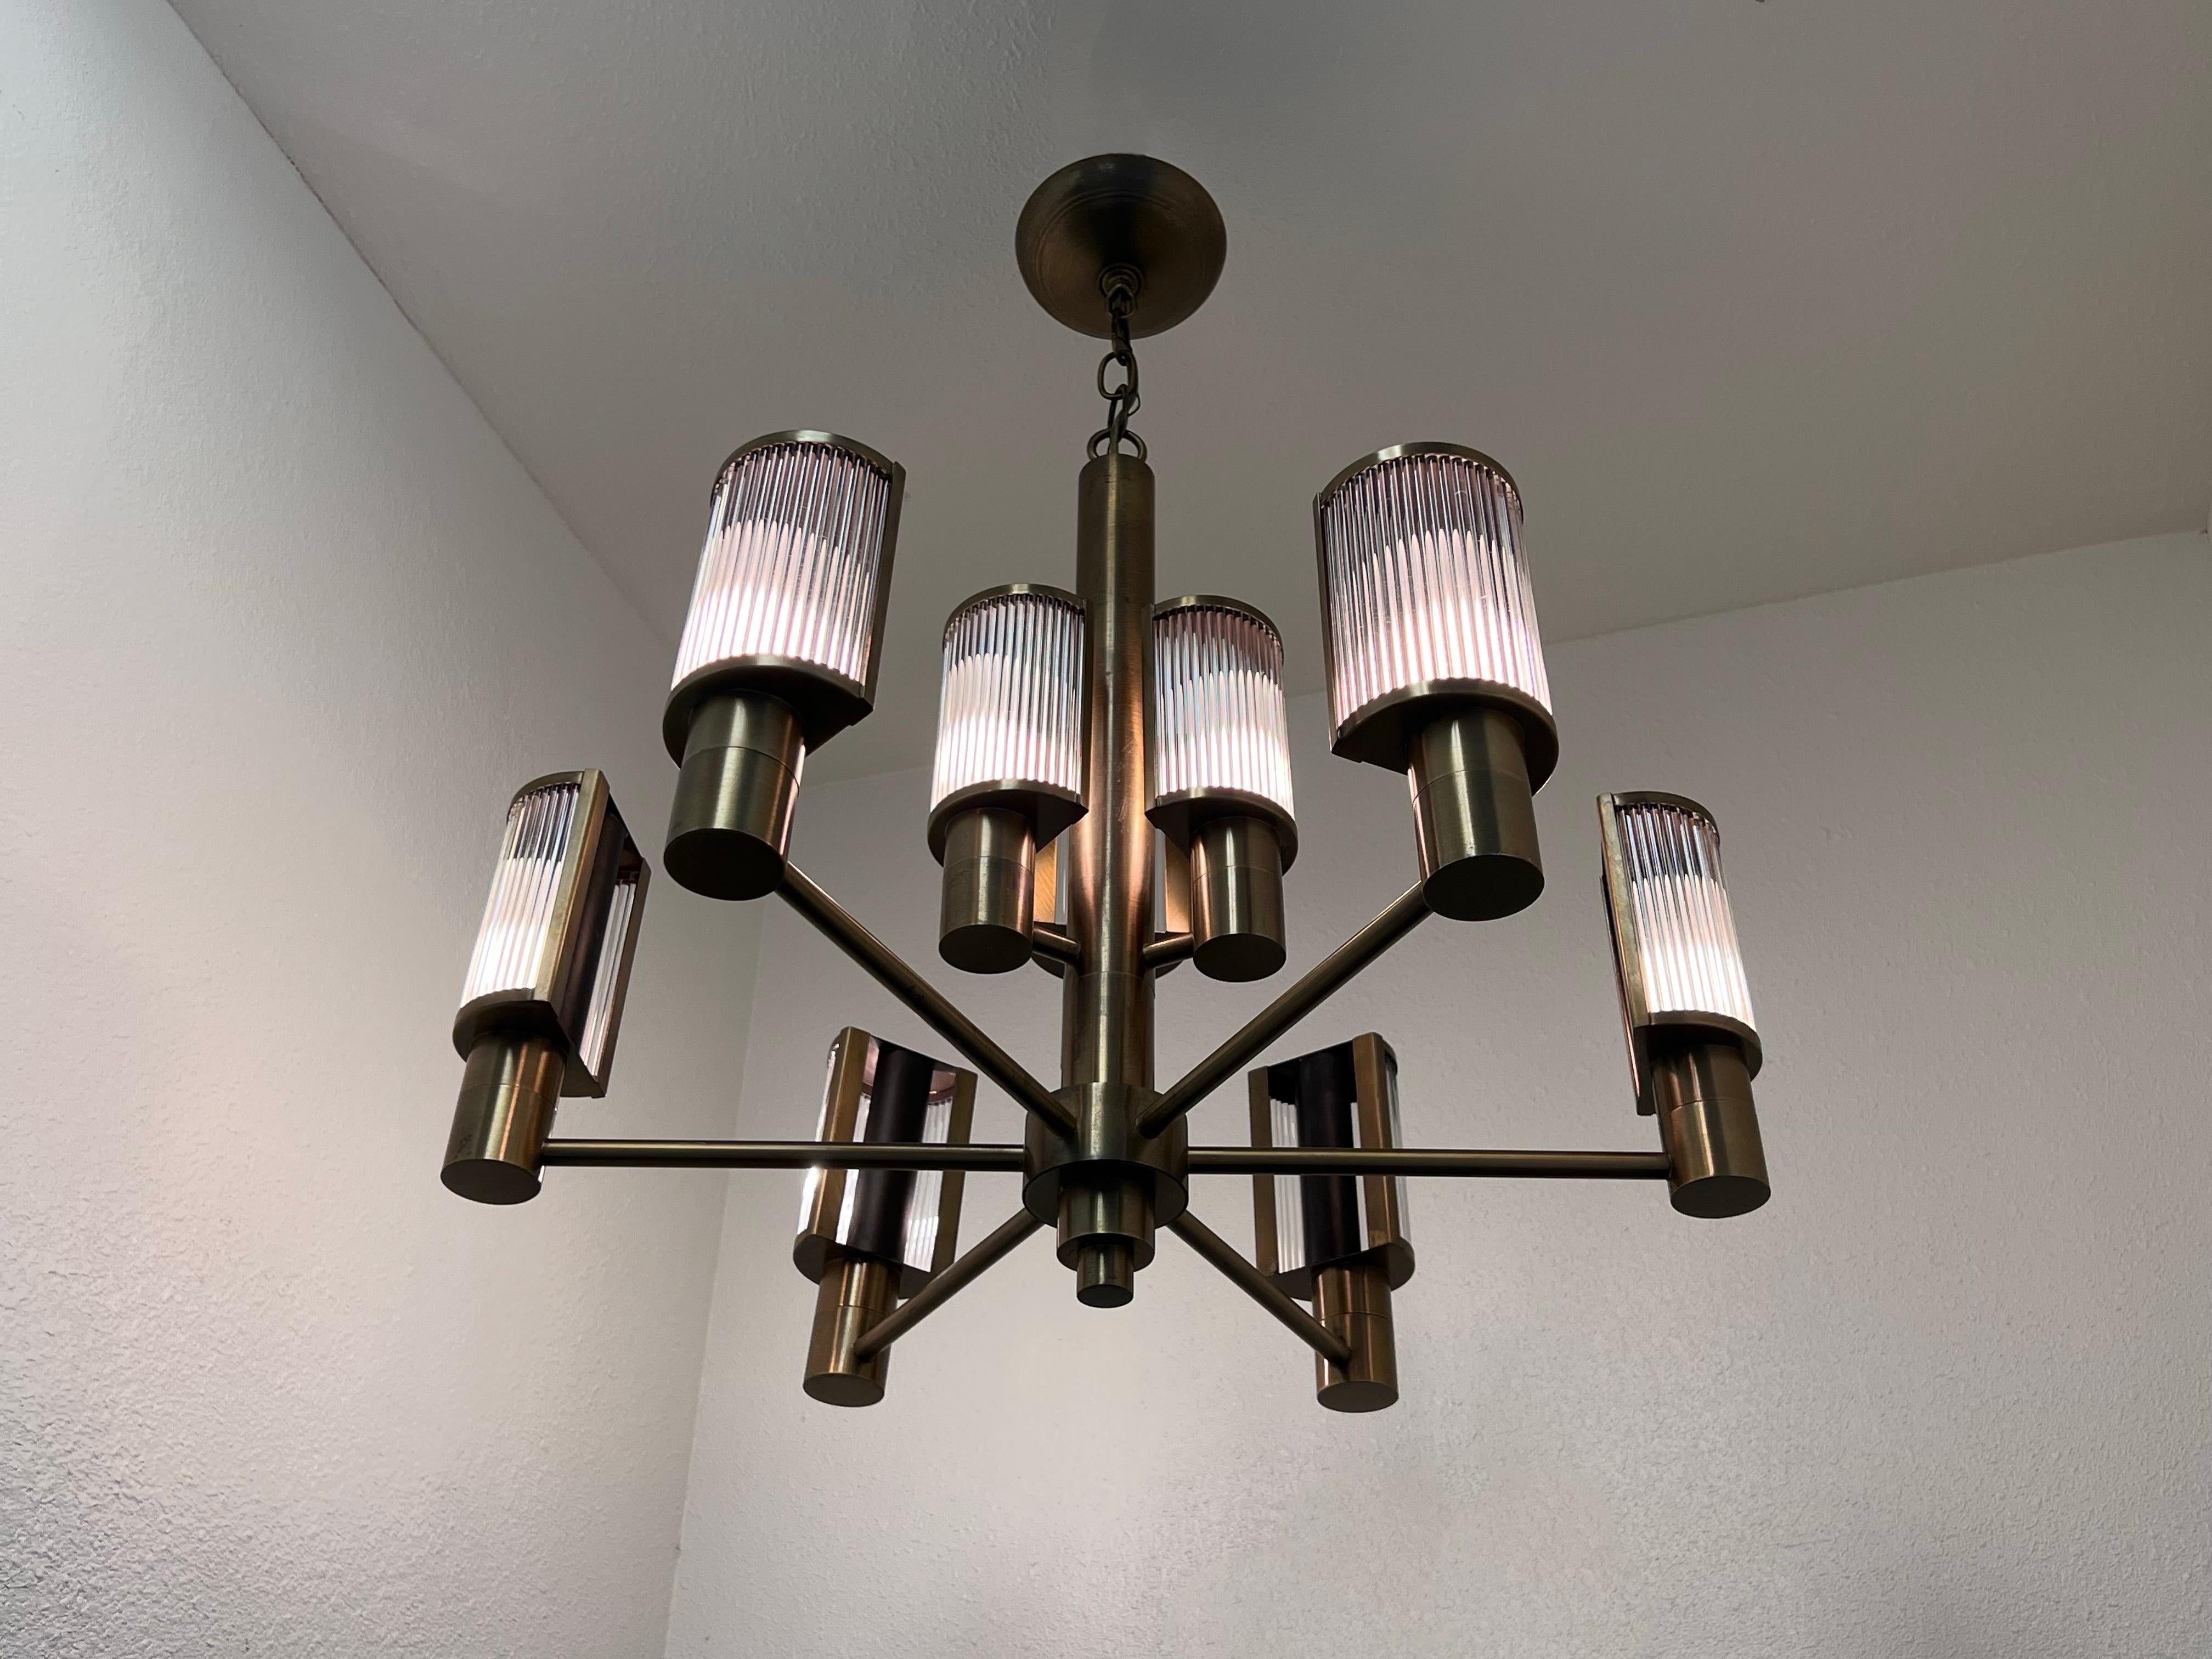 Rare nine arm chandelier by Casella Lighting. 
Constructed of glass rods and solid brass with antique brass finish. 
In original vintage condition shows minor wear consistent with age(see detail photos). 
The measurements are 24” in diameter 21.5”